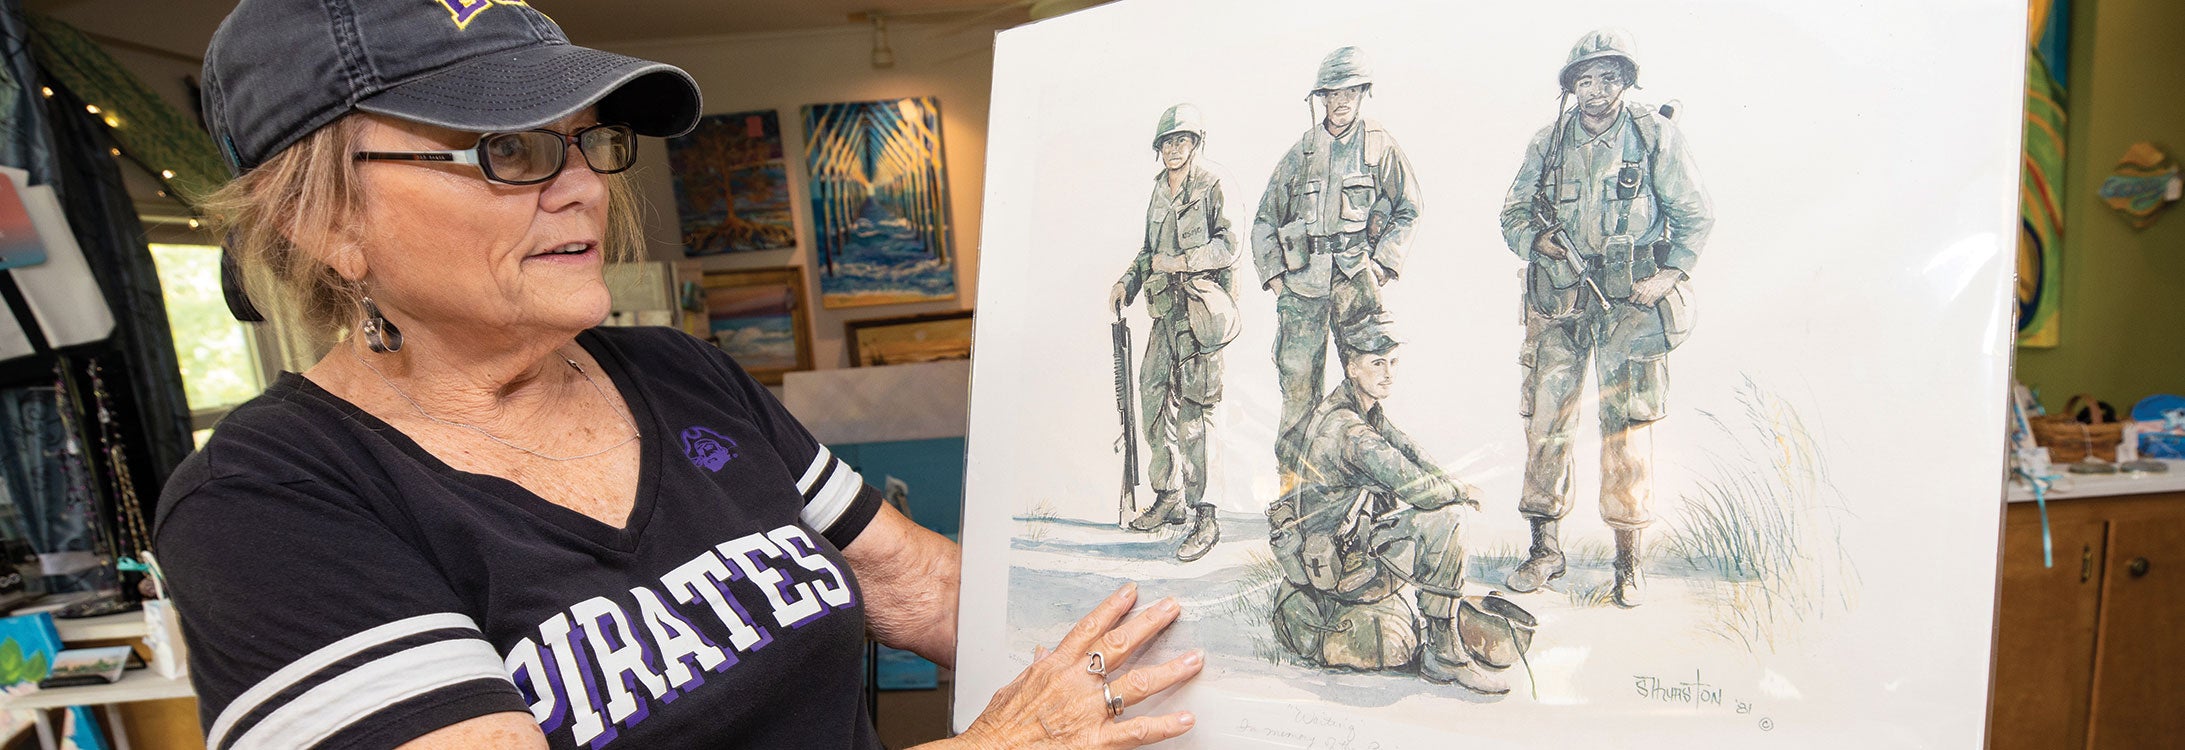 Sherry Thurston holds “Waiting,” which she
painted from a photo she took of Marines from the 24th Amphibious Unit at Camp Lejeune.